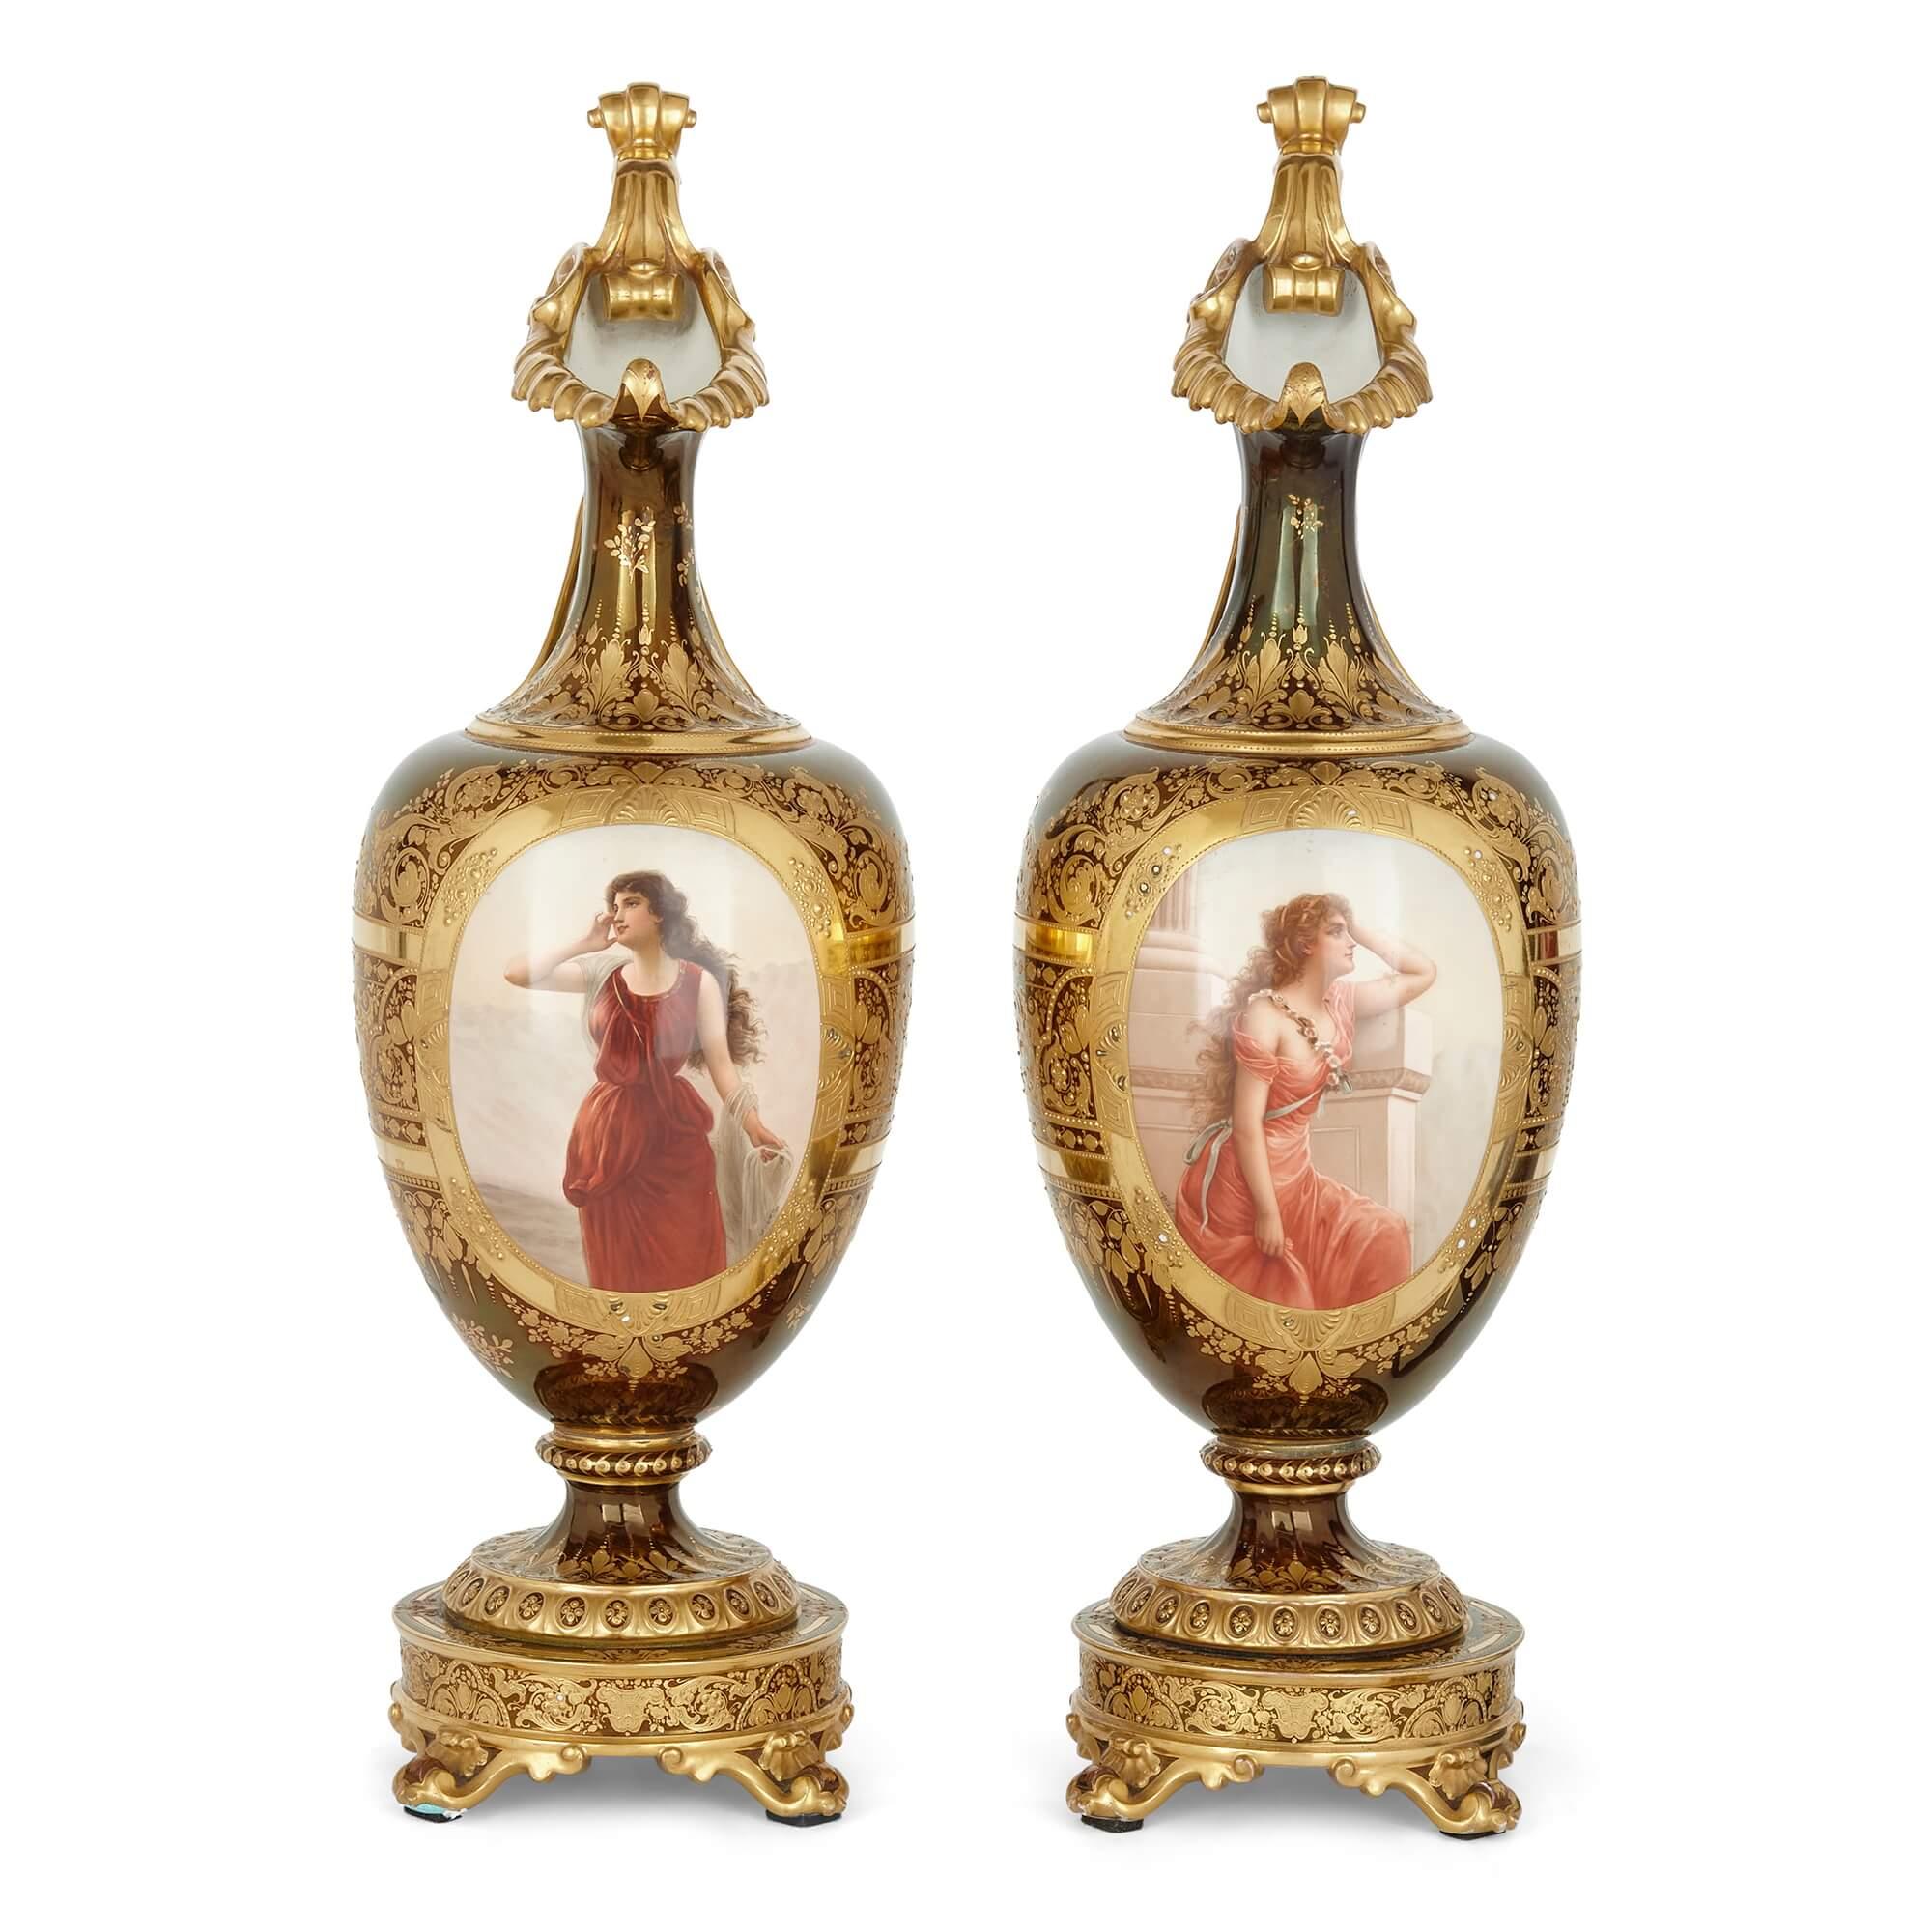 A pair of large Royal Vienna gilt and painted porcelain ewers.
Austrian, late 19th Century.
42.5cm high x 20cm wide x 17cm depth.

This superb pair of large Royal Vienna gilt and painted porcelain ewers were made in Austria in the Late 19th